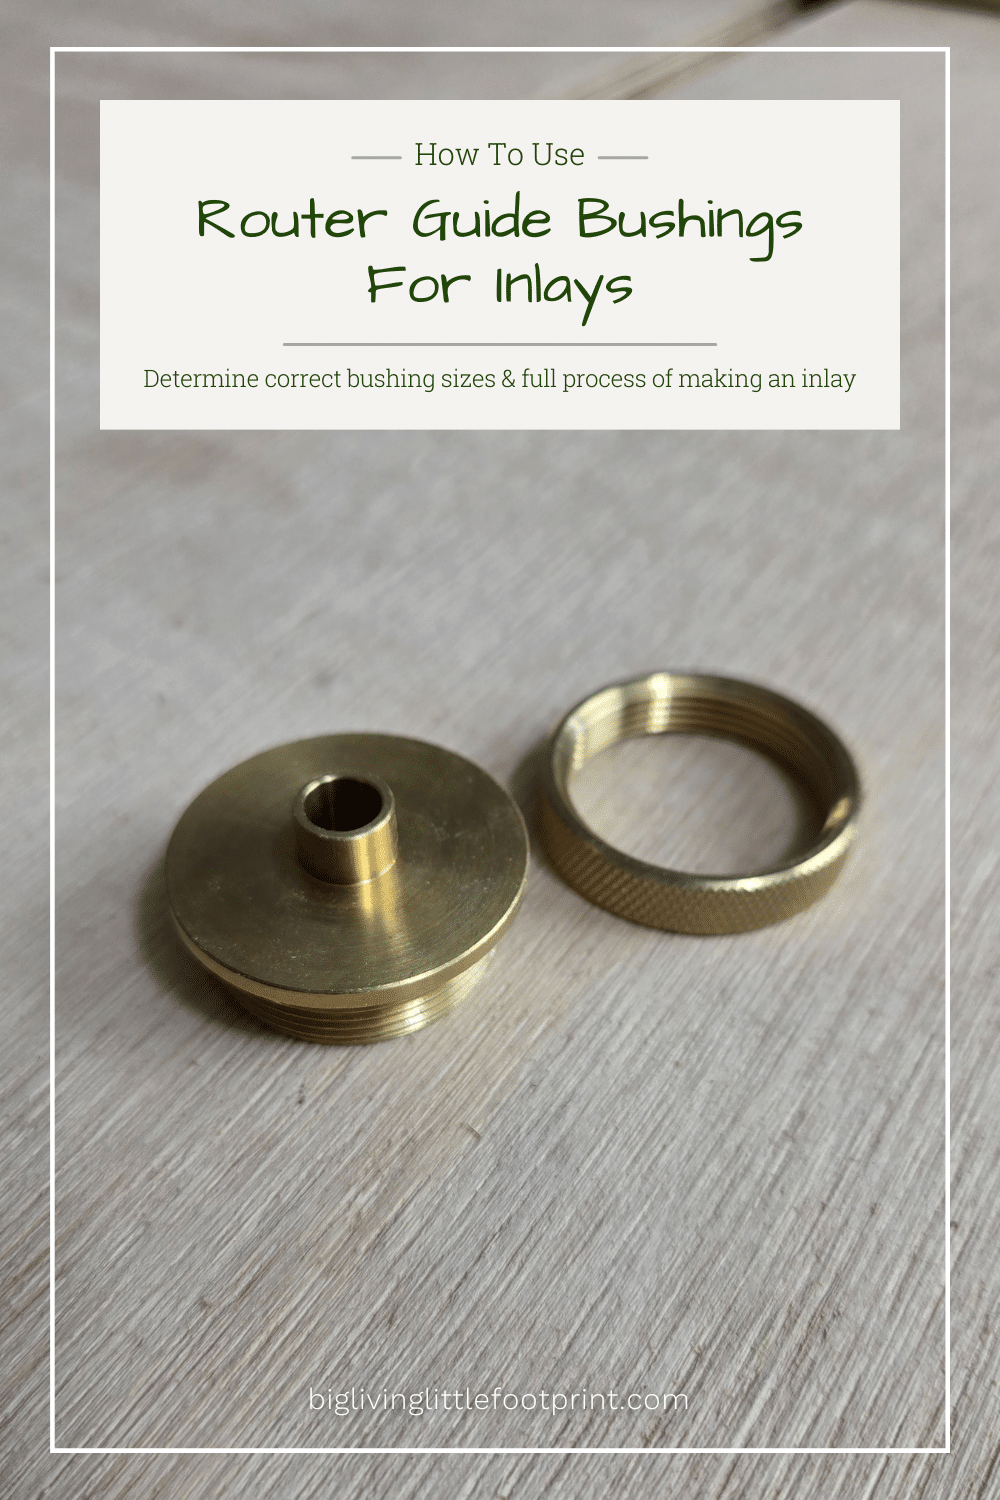 How To Use Router Guide Bushings For Inlays article cover page showing guide bushing and locking ring